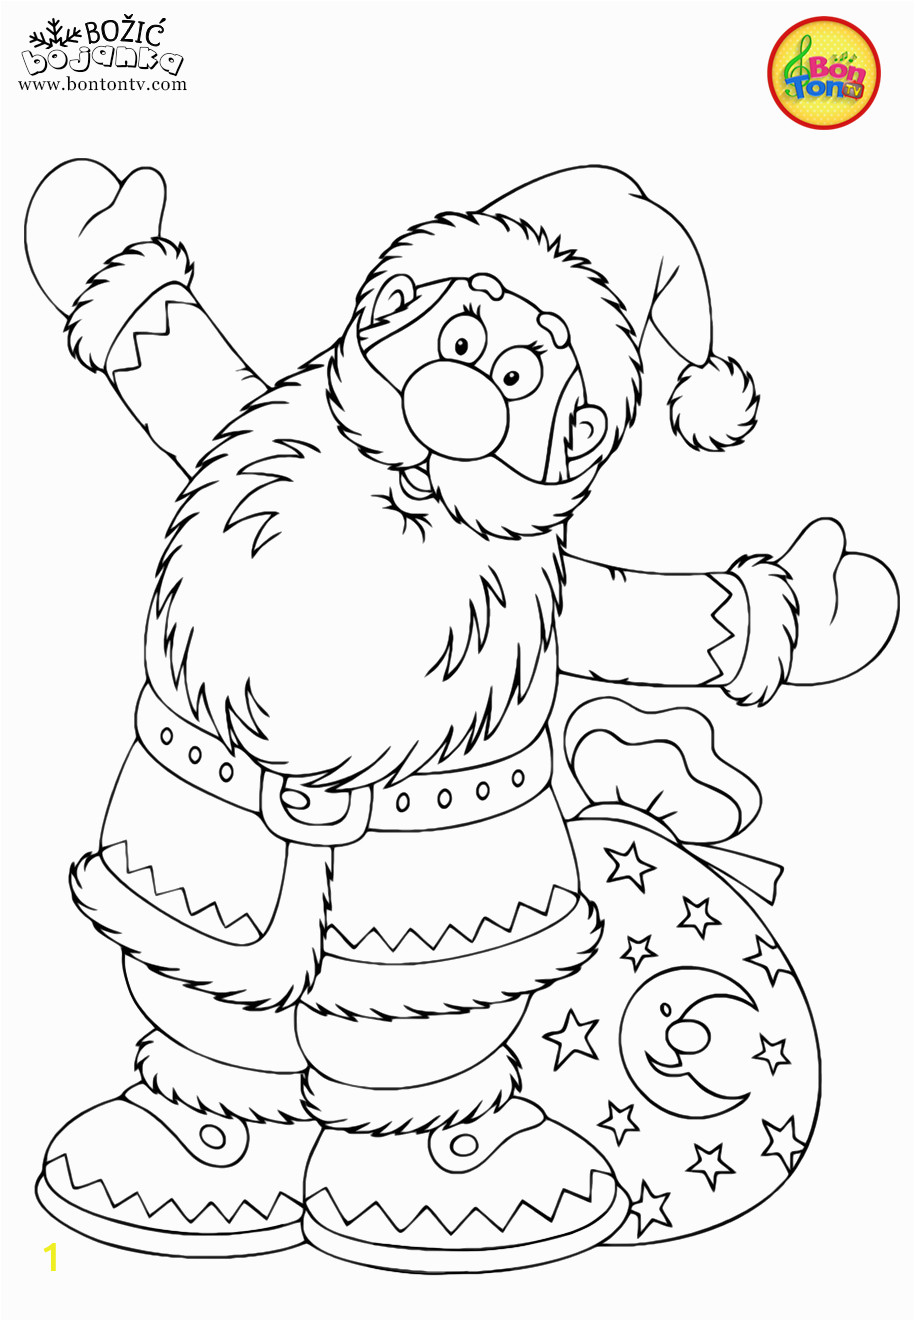 Santa Christmas Coloring Pages Christmas Coloring Pages BoÅ¾iÄ Bojanke Za Djecu Free